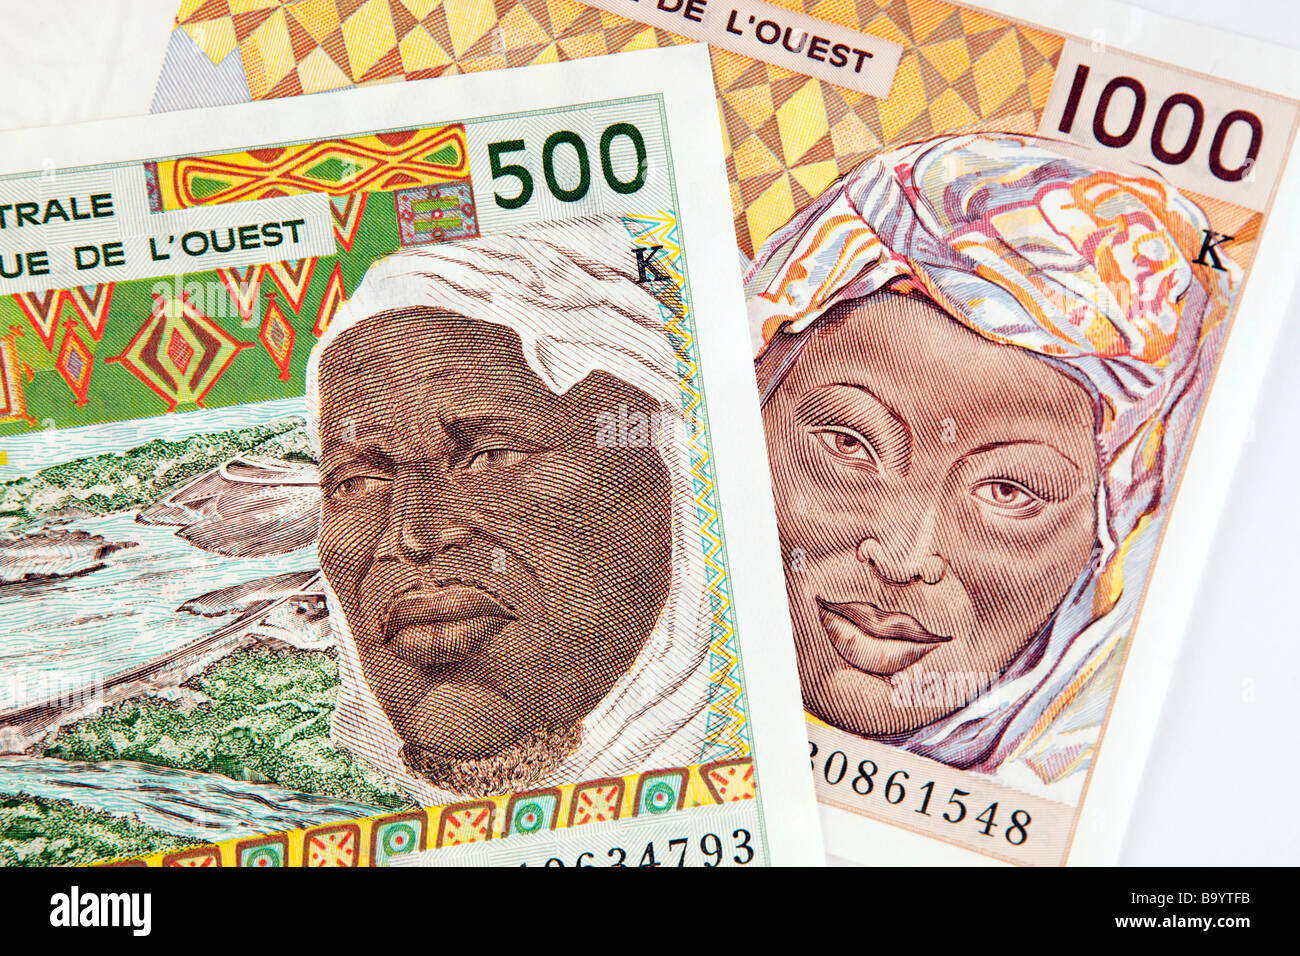 Money currency detail of Senegalese 500 and 1000 West African CFA Franc banknotes Stock Photo